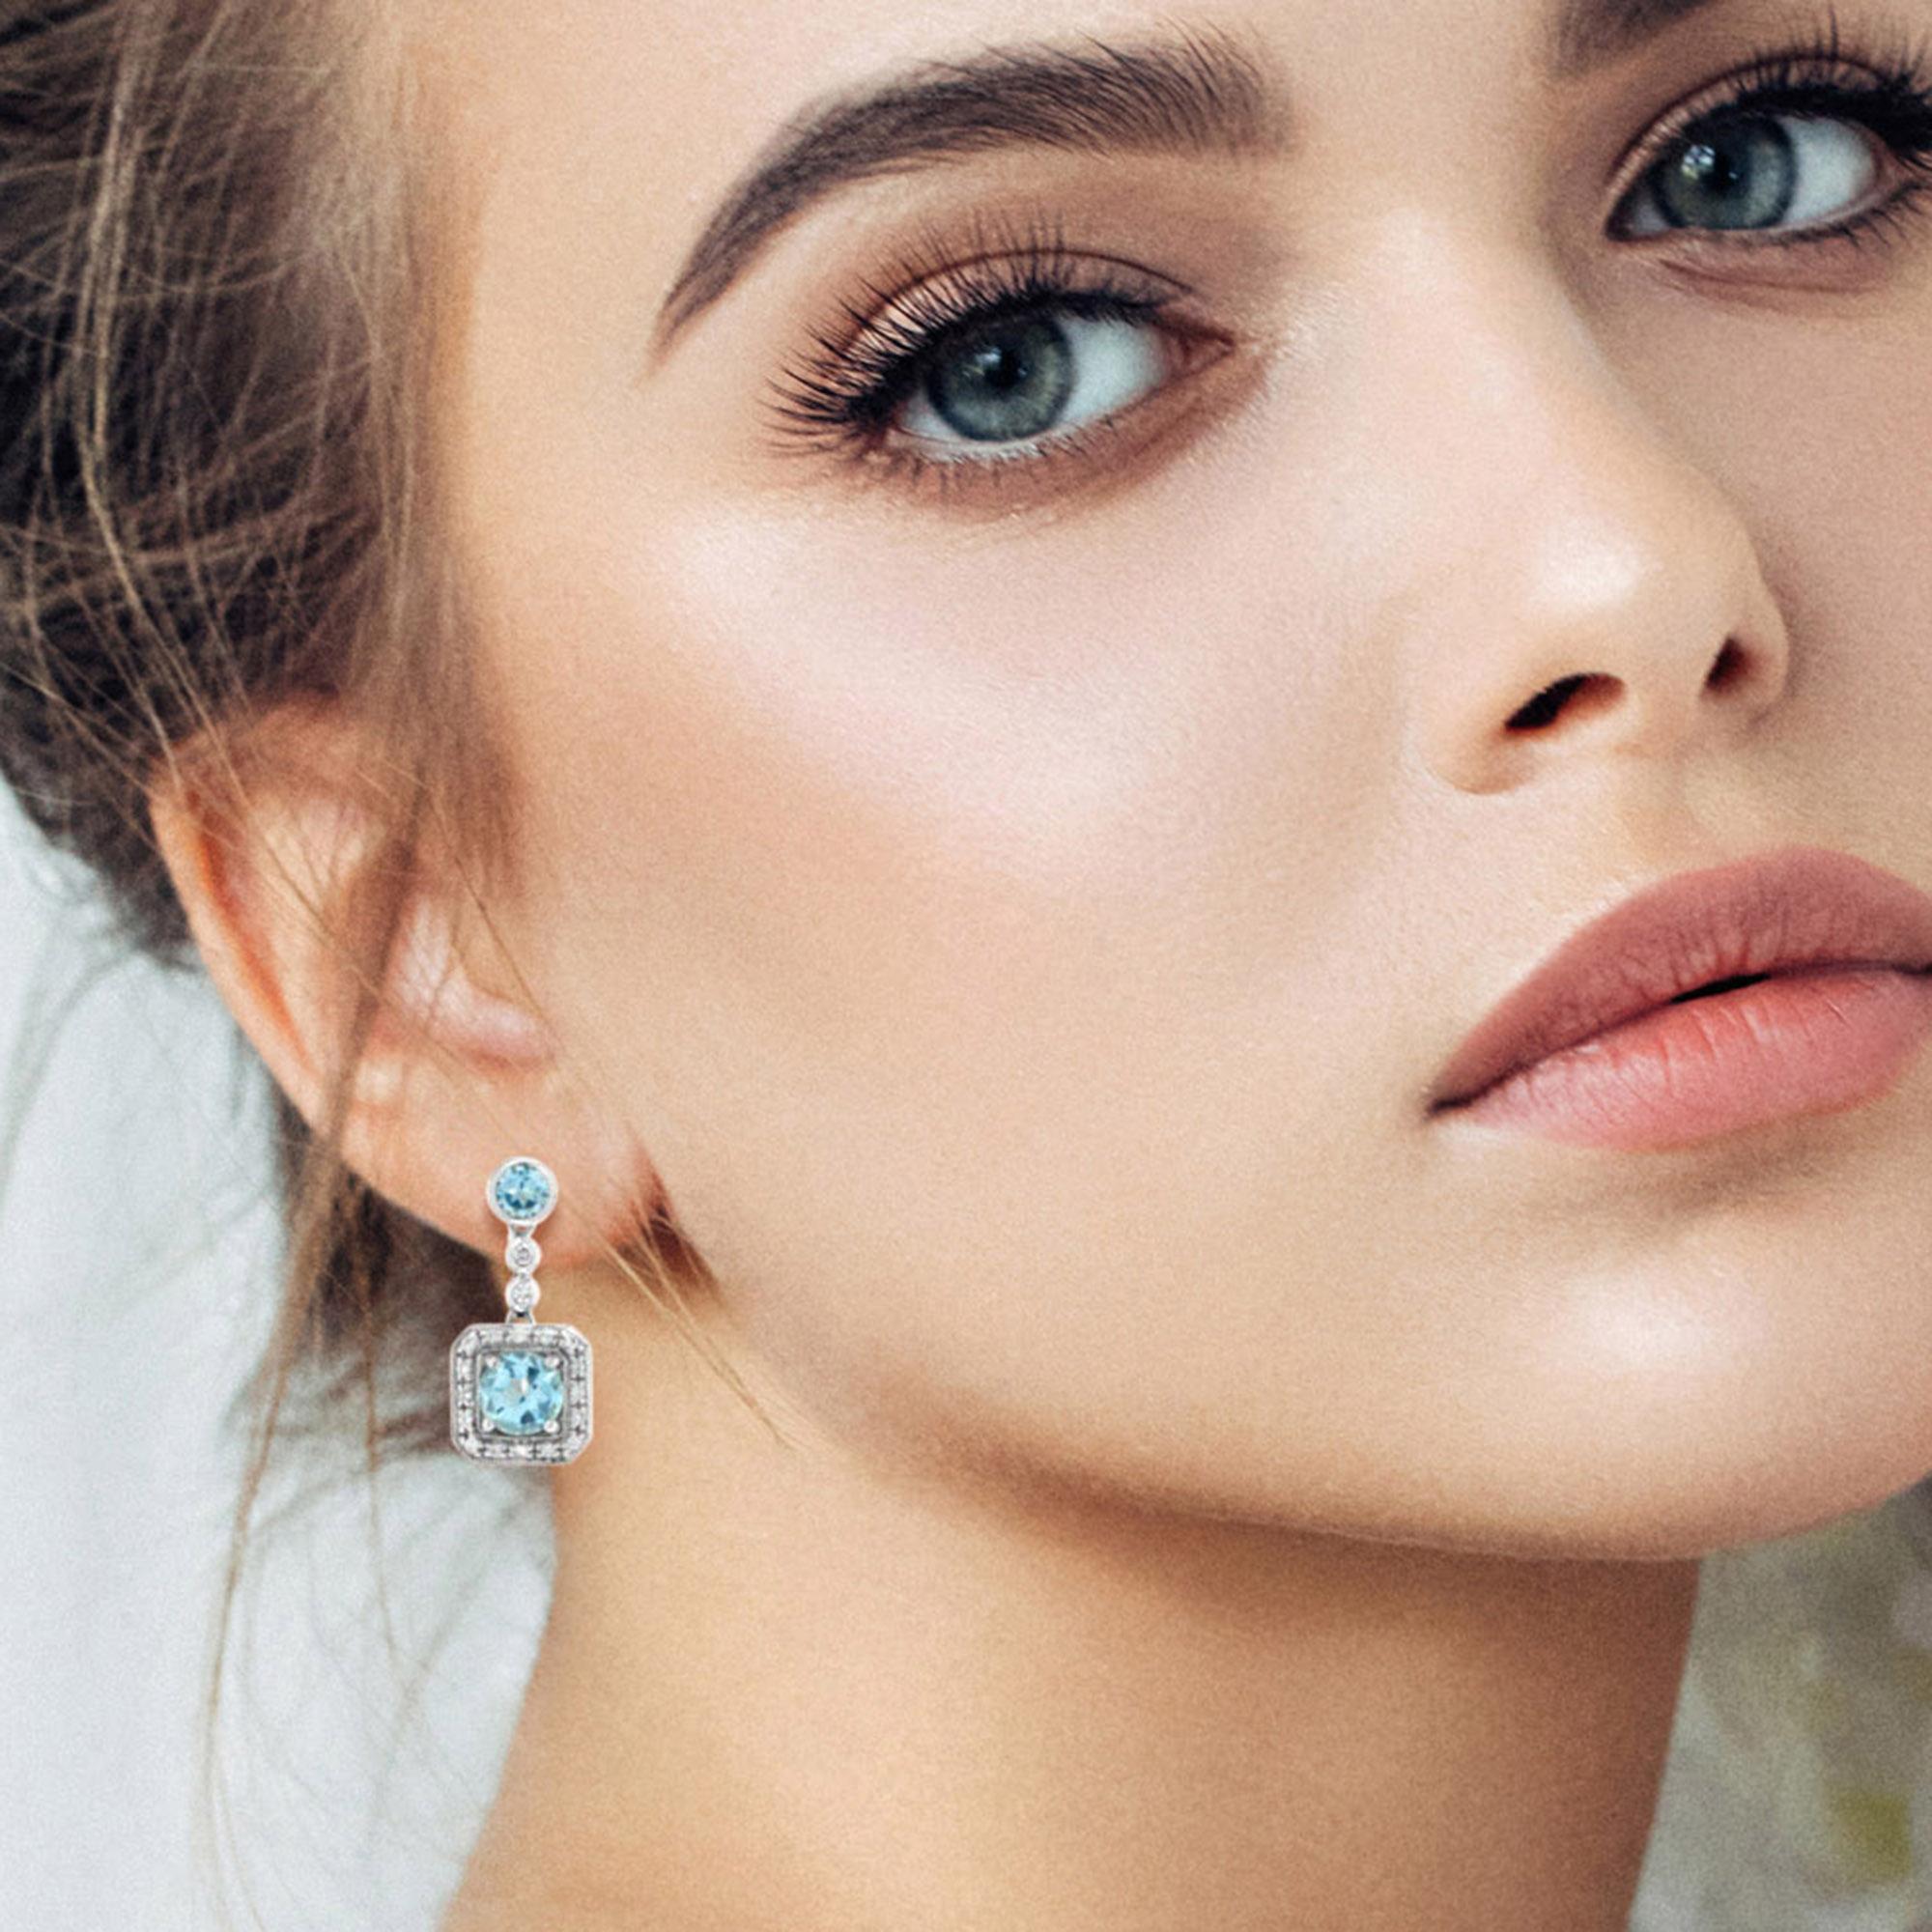 Dainty round cut sky blue topaz are framed by tiny diamond on square frame in 14k white gold. Pretty earrings for bridesmaids and great for brides looking for square shape earrings and need it simple. The earrings can be used on every occasion and